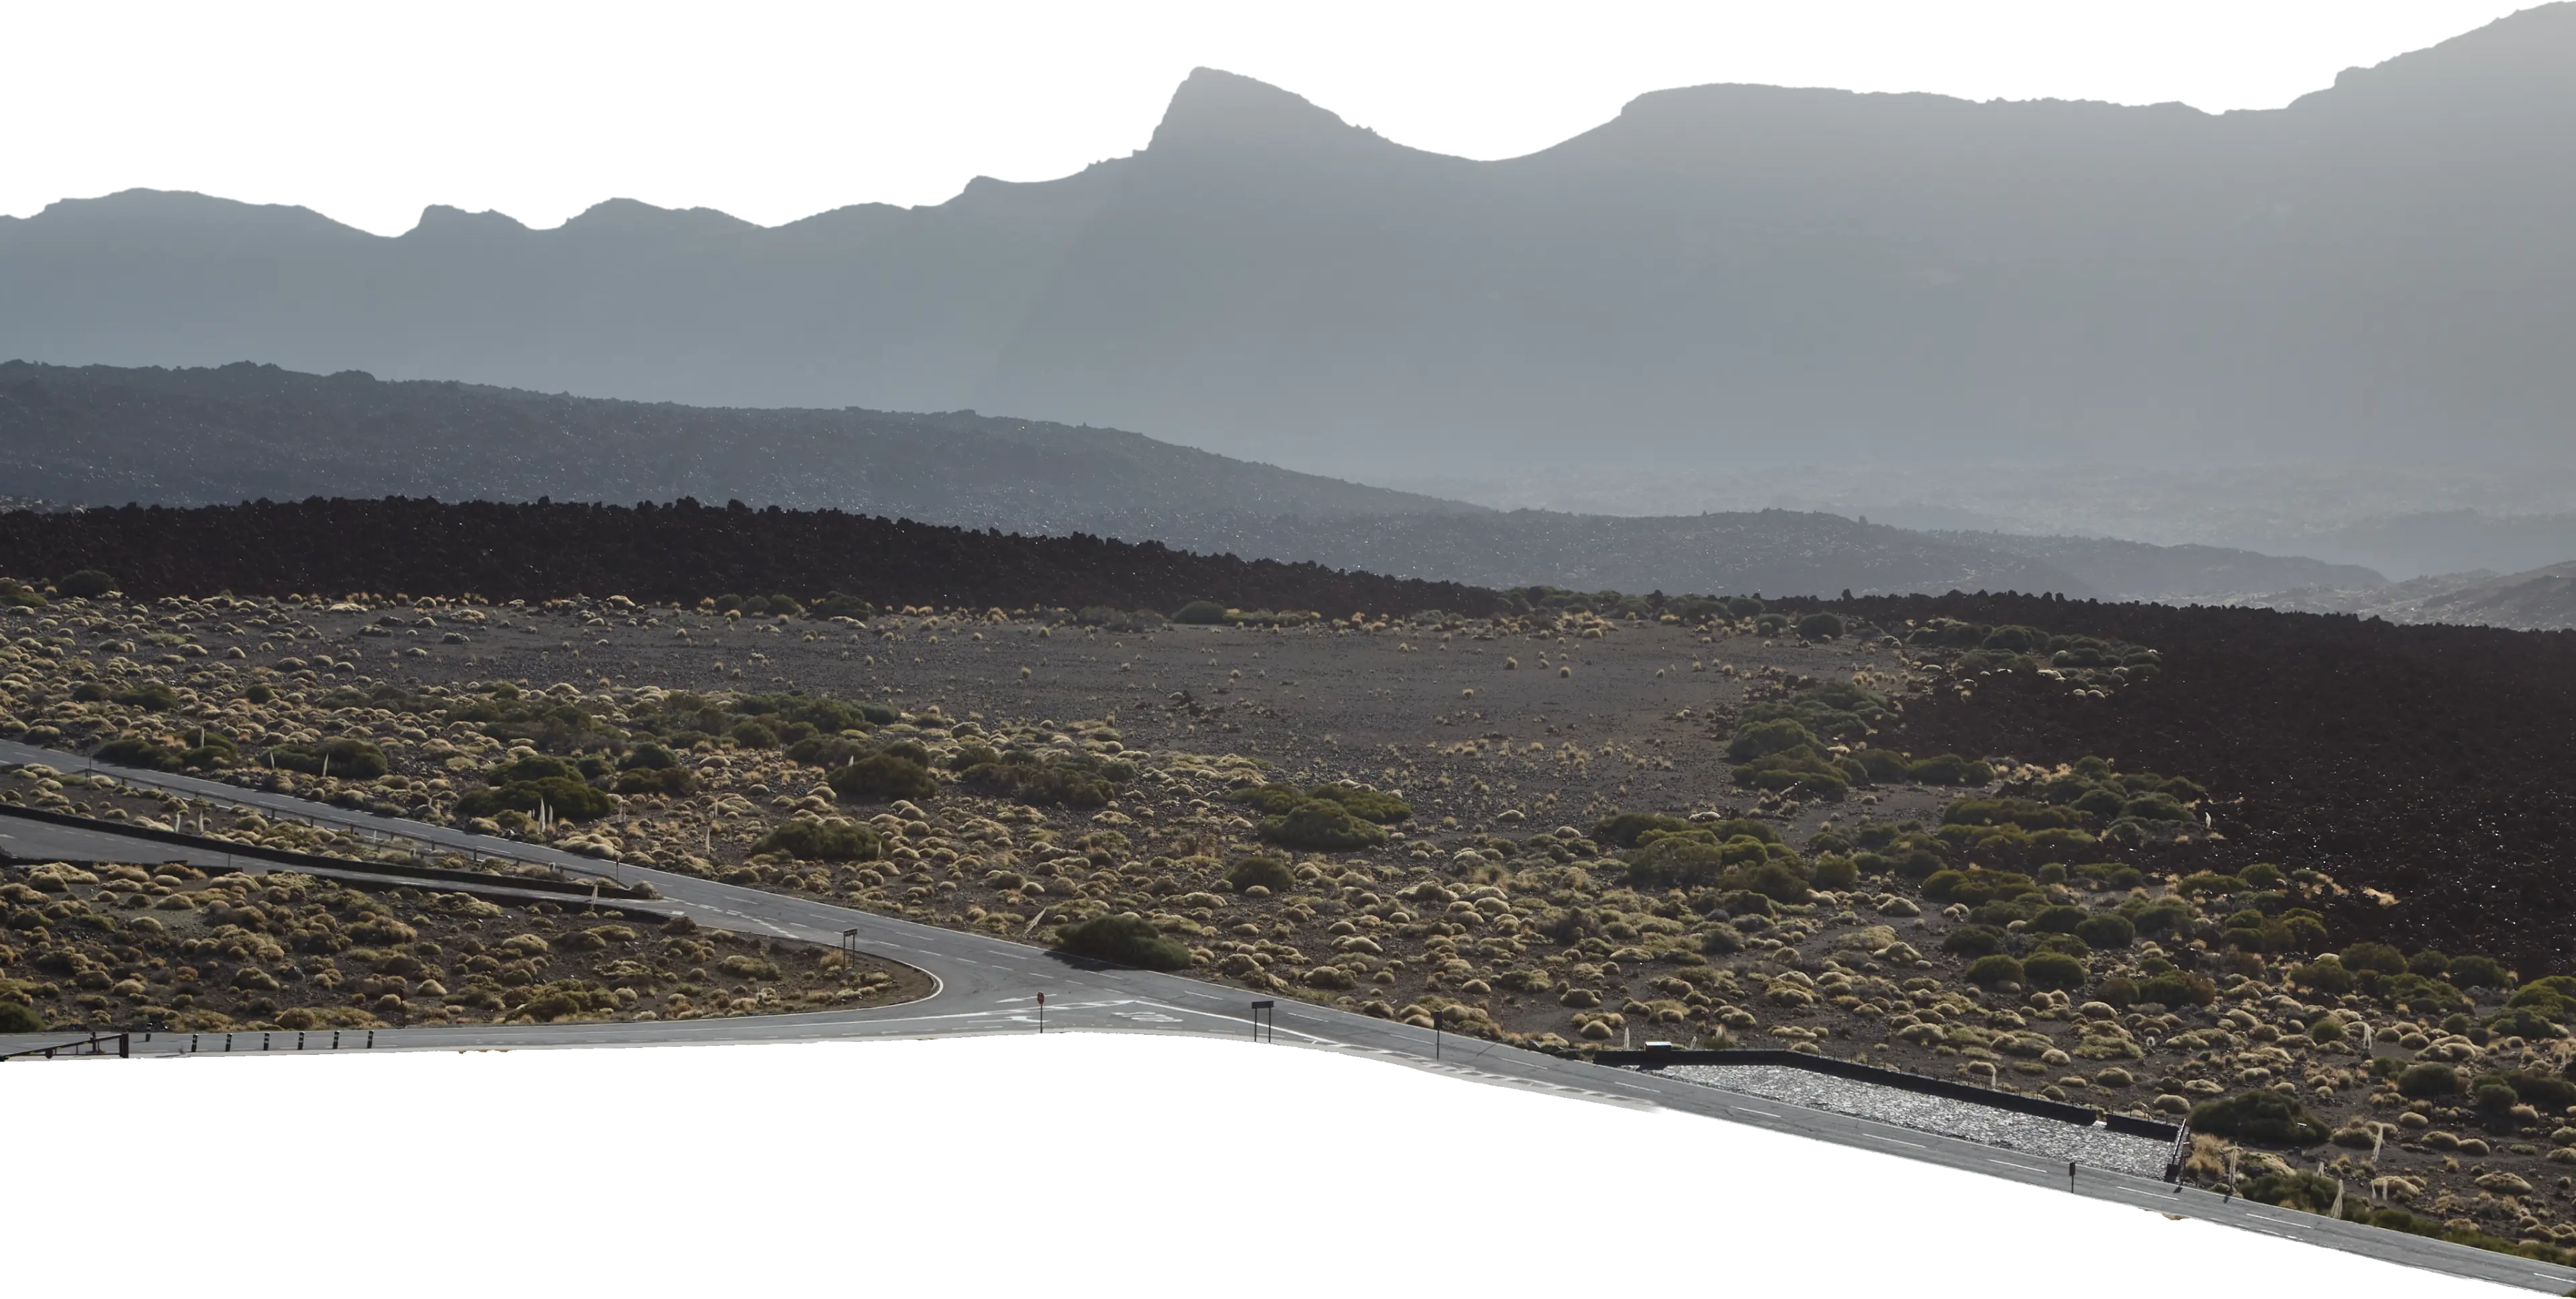 road with an intersection on a volcanic desert landscape, representing an empty canvas